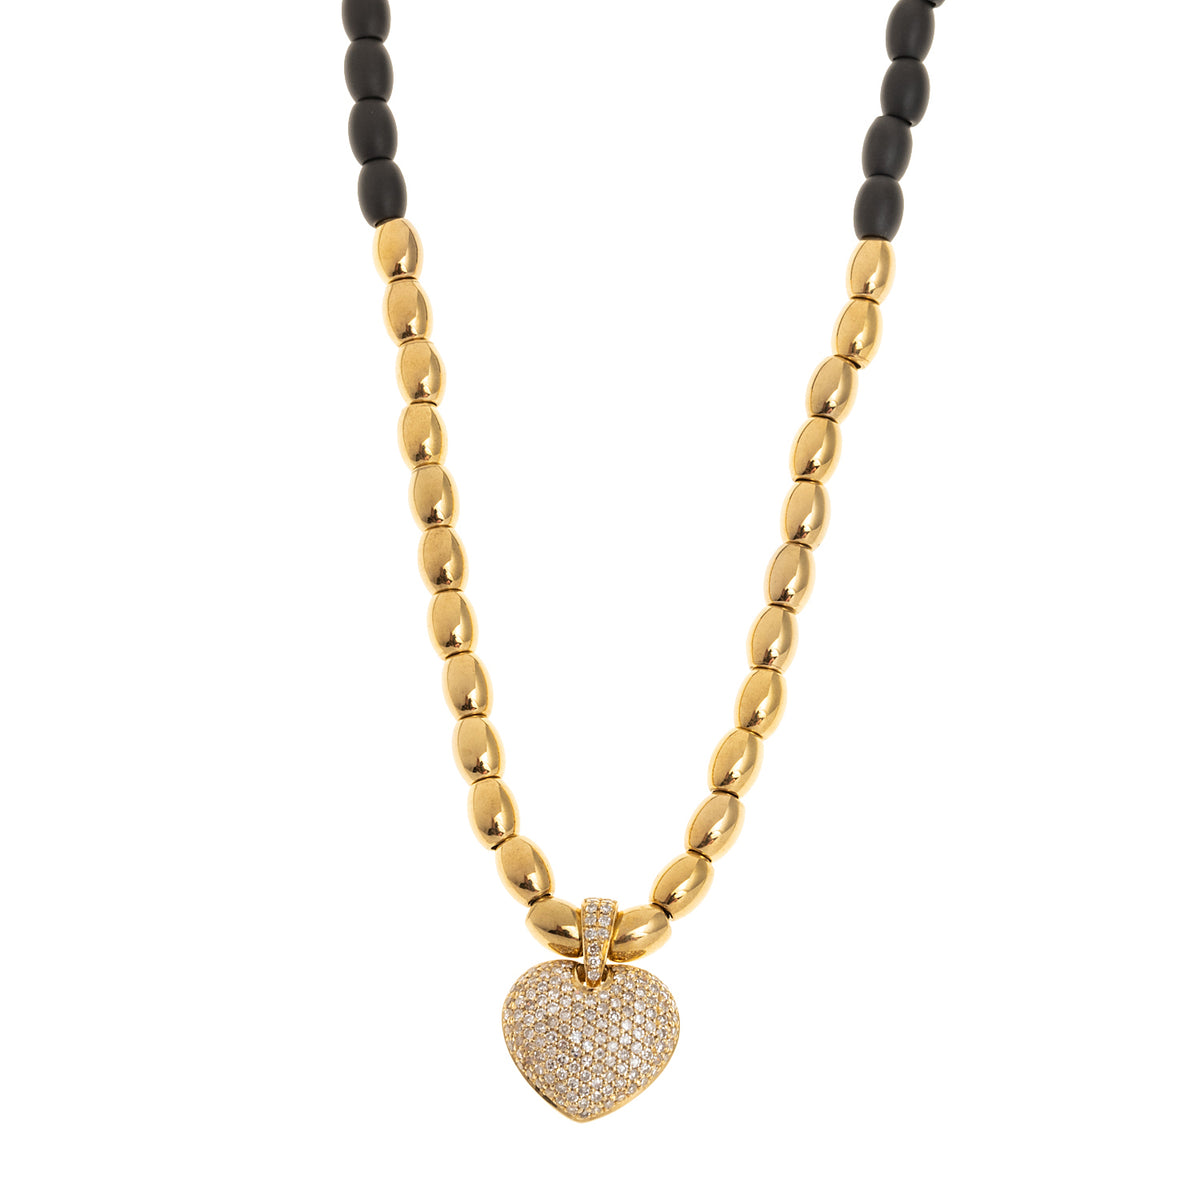 Symbol necklace. Heart, butterfly, round necklace. Gift necklace. Gold necklace. Diamond necklace. Precious stone necklace. Evil Eye necklace. Chain necklace. Easy to wear necklace. Anatol jewelry. Fine jewelry. Golden Hall. Kifissia. Athens. Χρυσό κολιέ. Κολιέ με διαμάντια. Χρυσά κοσμήματα. Κηφισιά. Κολιέ με μπριγιάν.